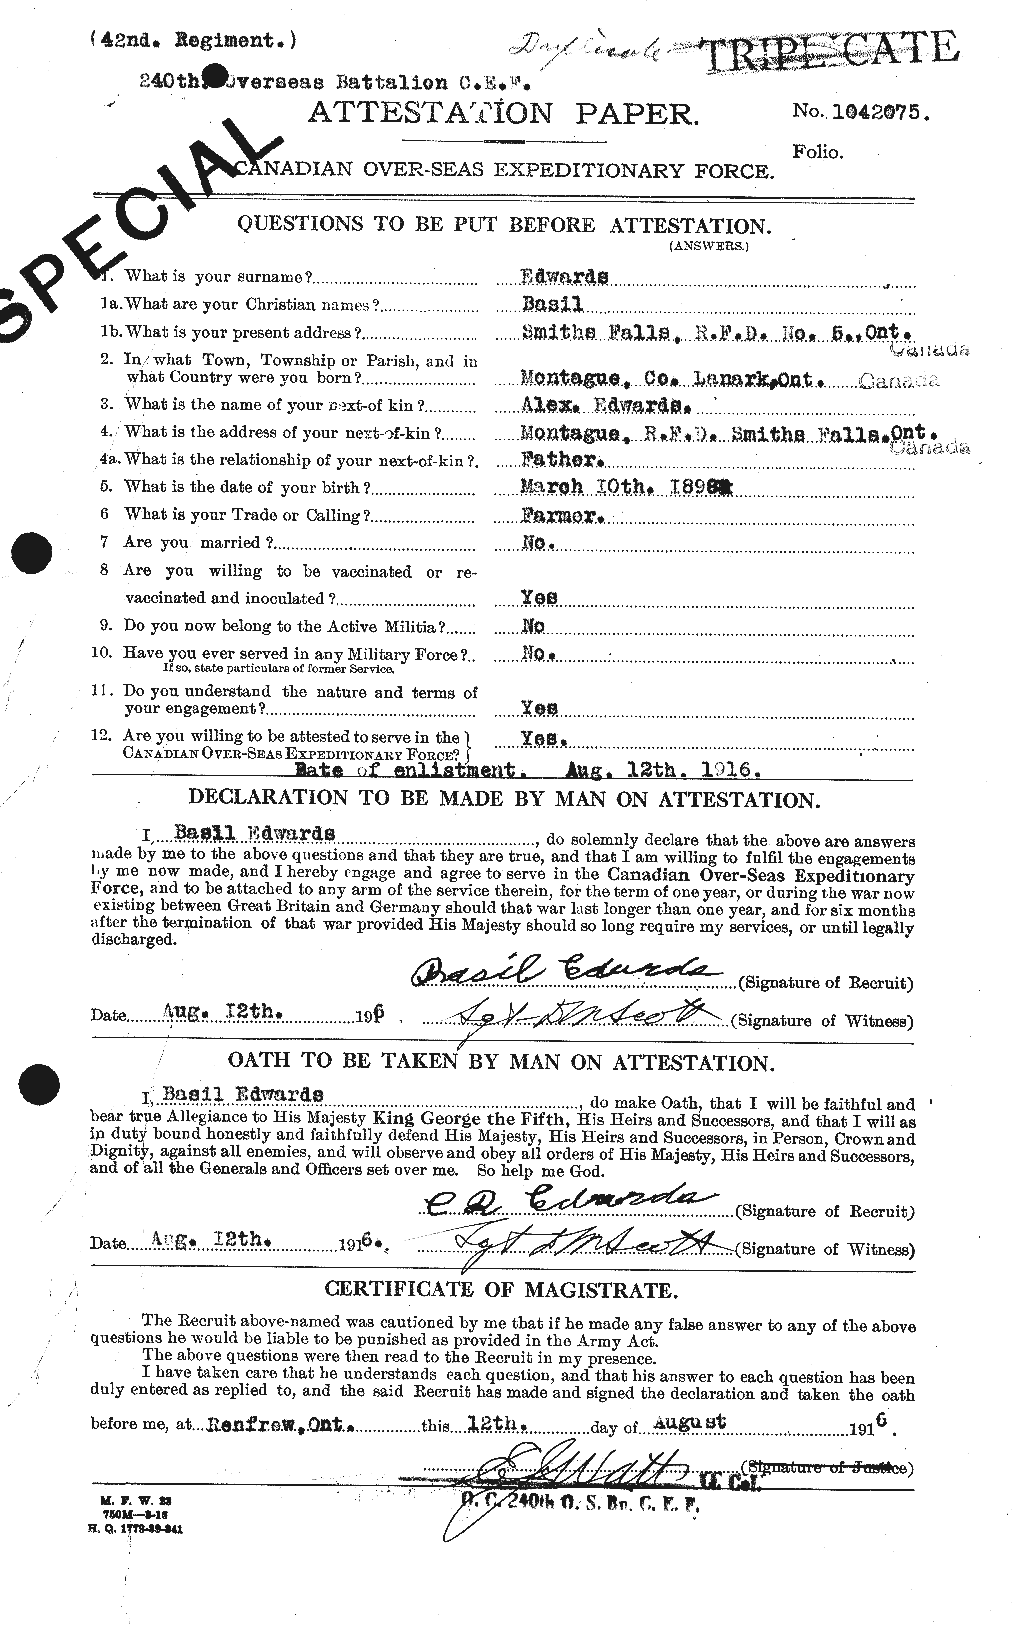 Personnel Records of the First World War - CEF 313146a